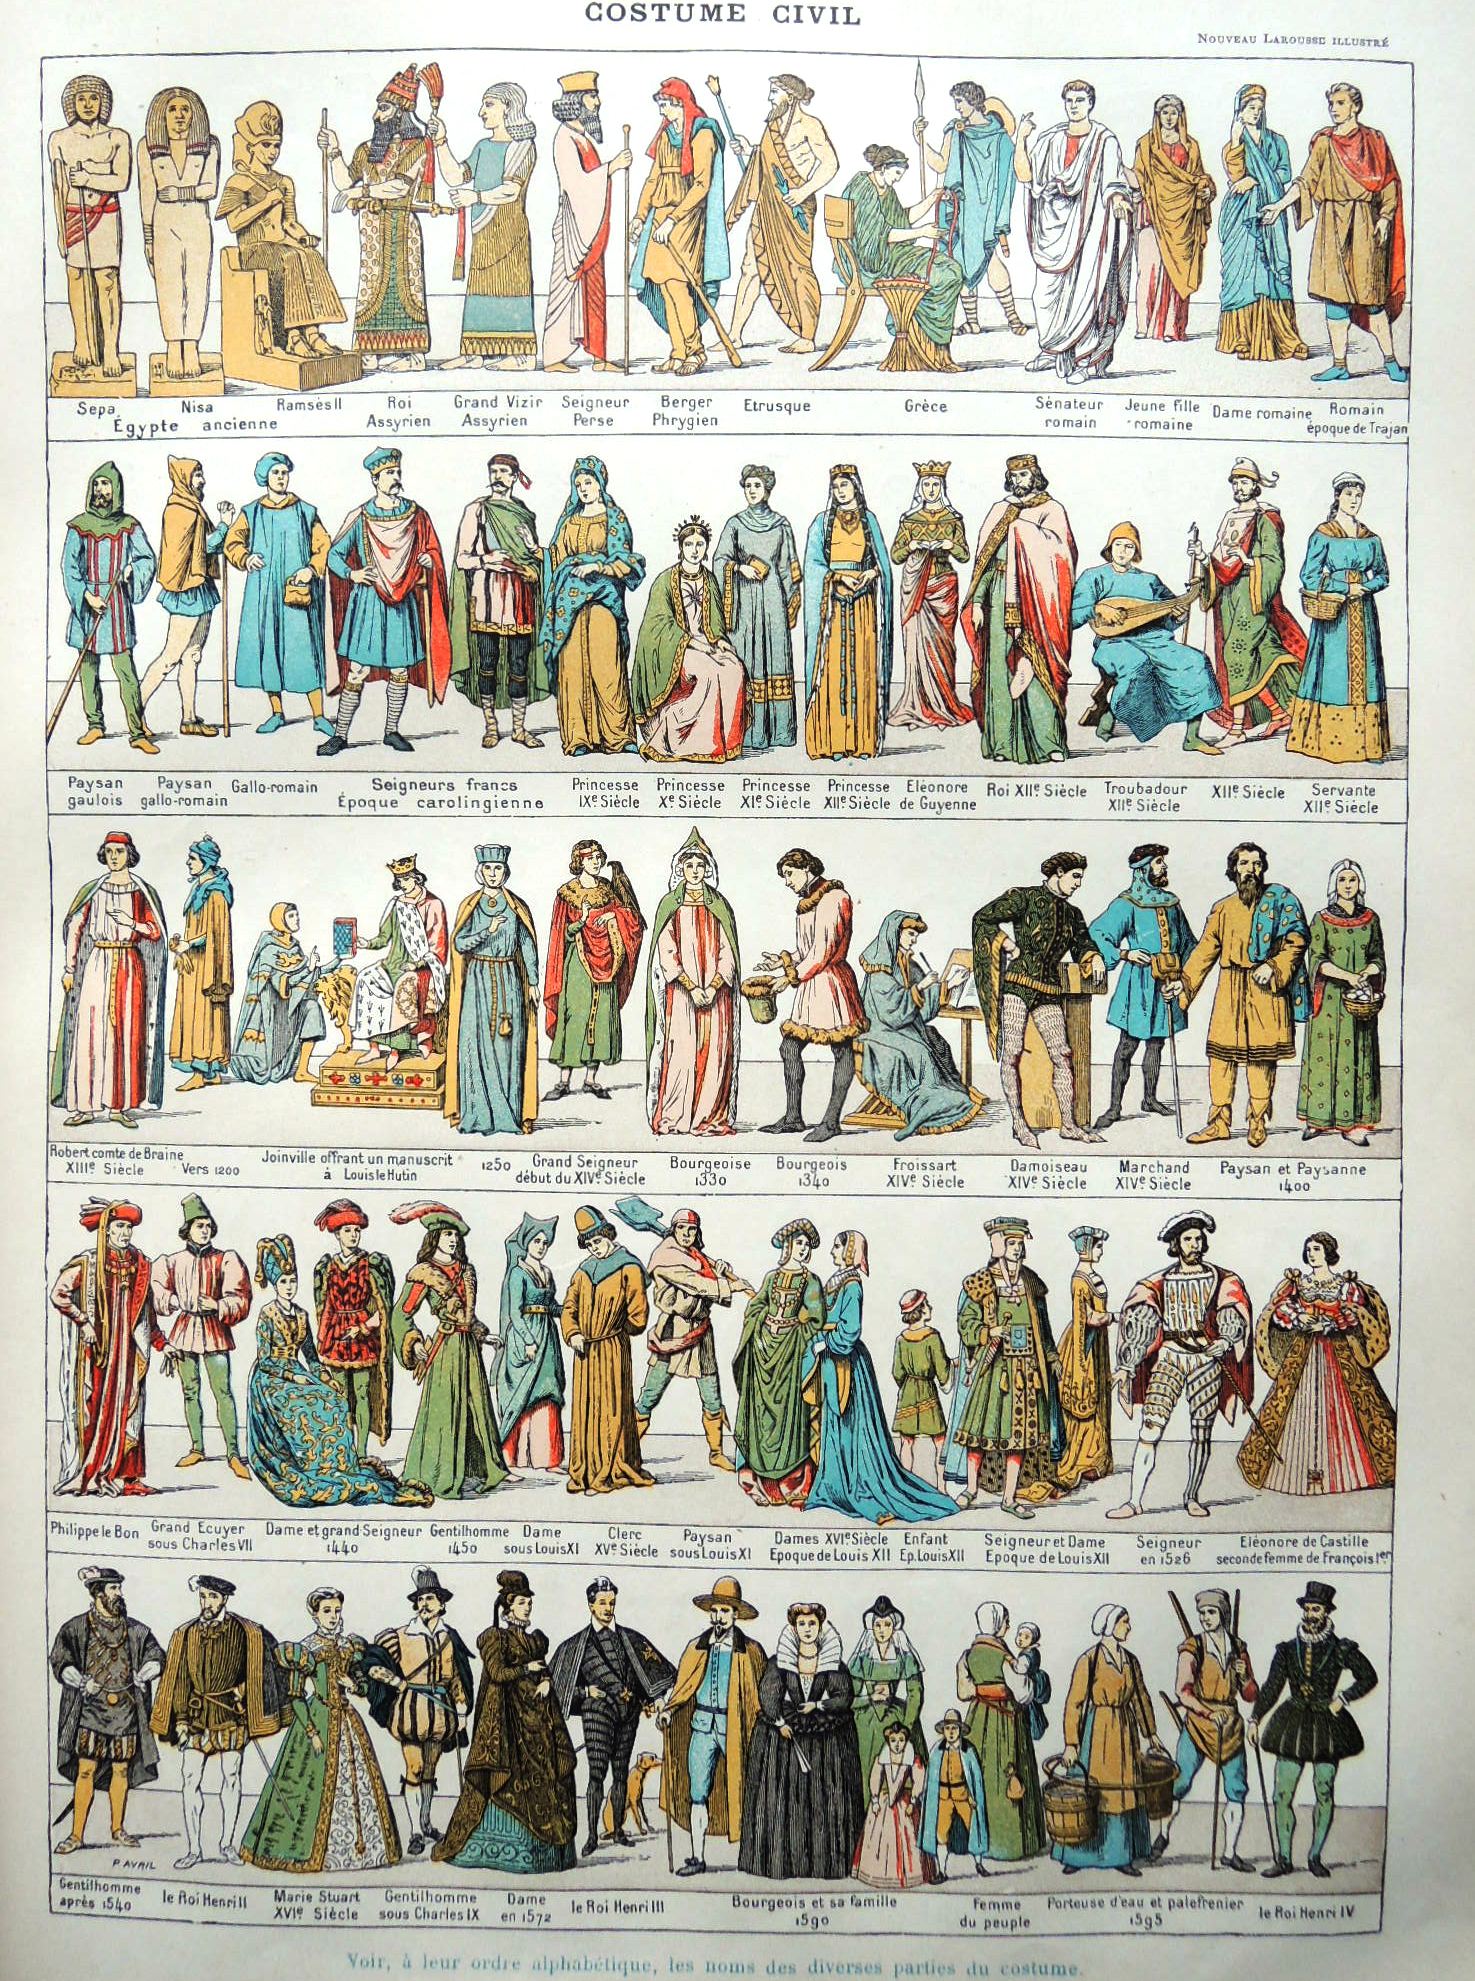 A timeline of historical fashionable dress.